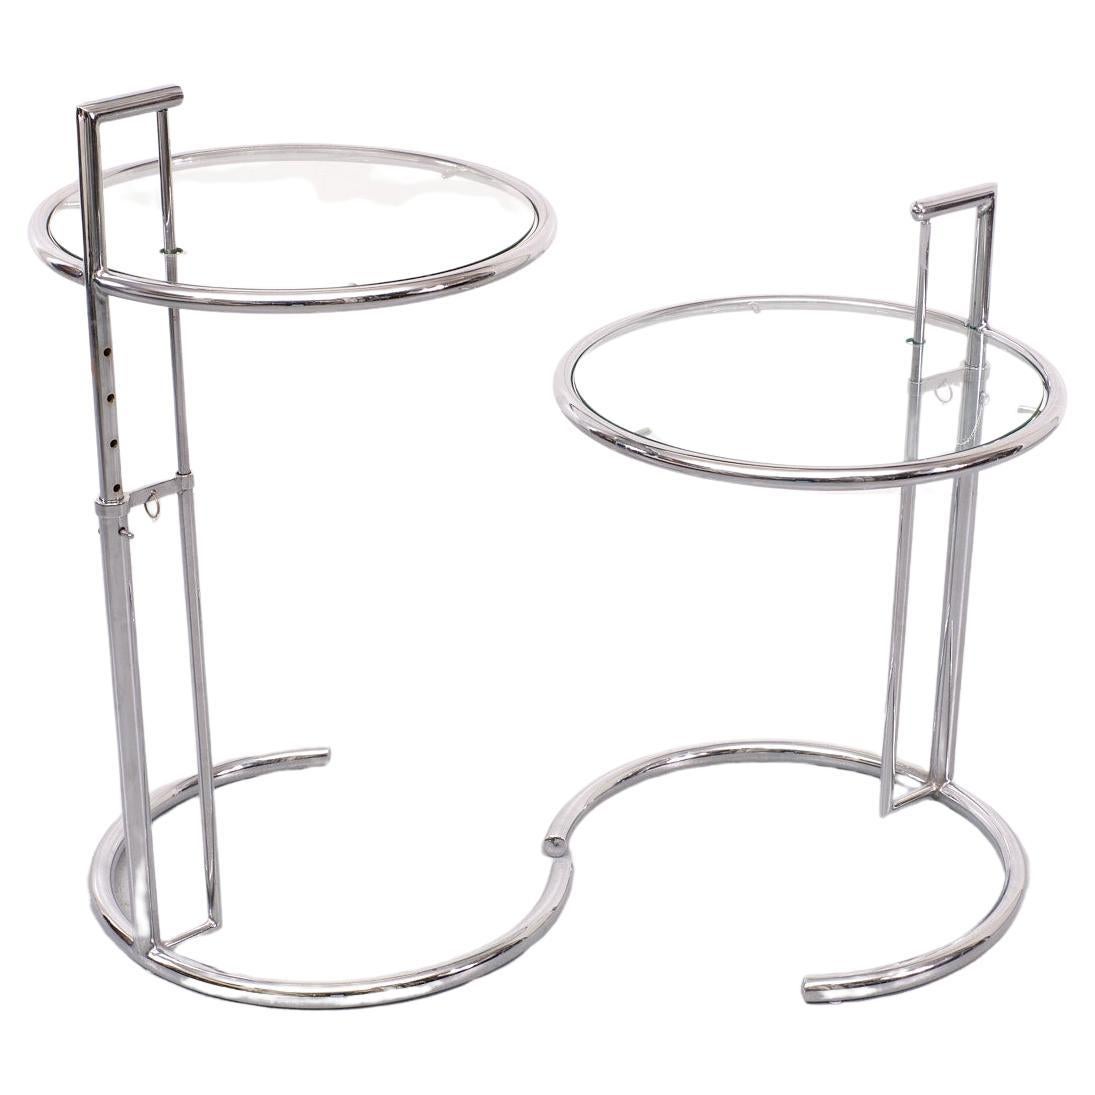 These vintage tubular steel and glass E1027 end tables  was designed by Eileen Gray in 1926. The ingenious design features a chrome-plated tubular steel frame with circular glass tabletop  The table height is adjustable along the base making it a